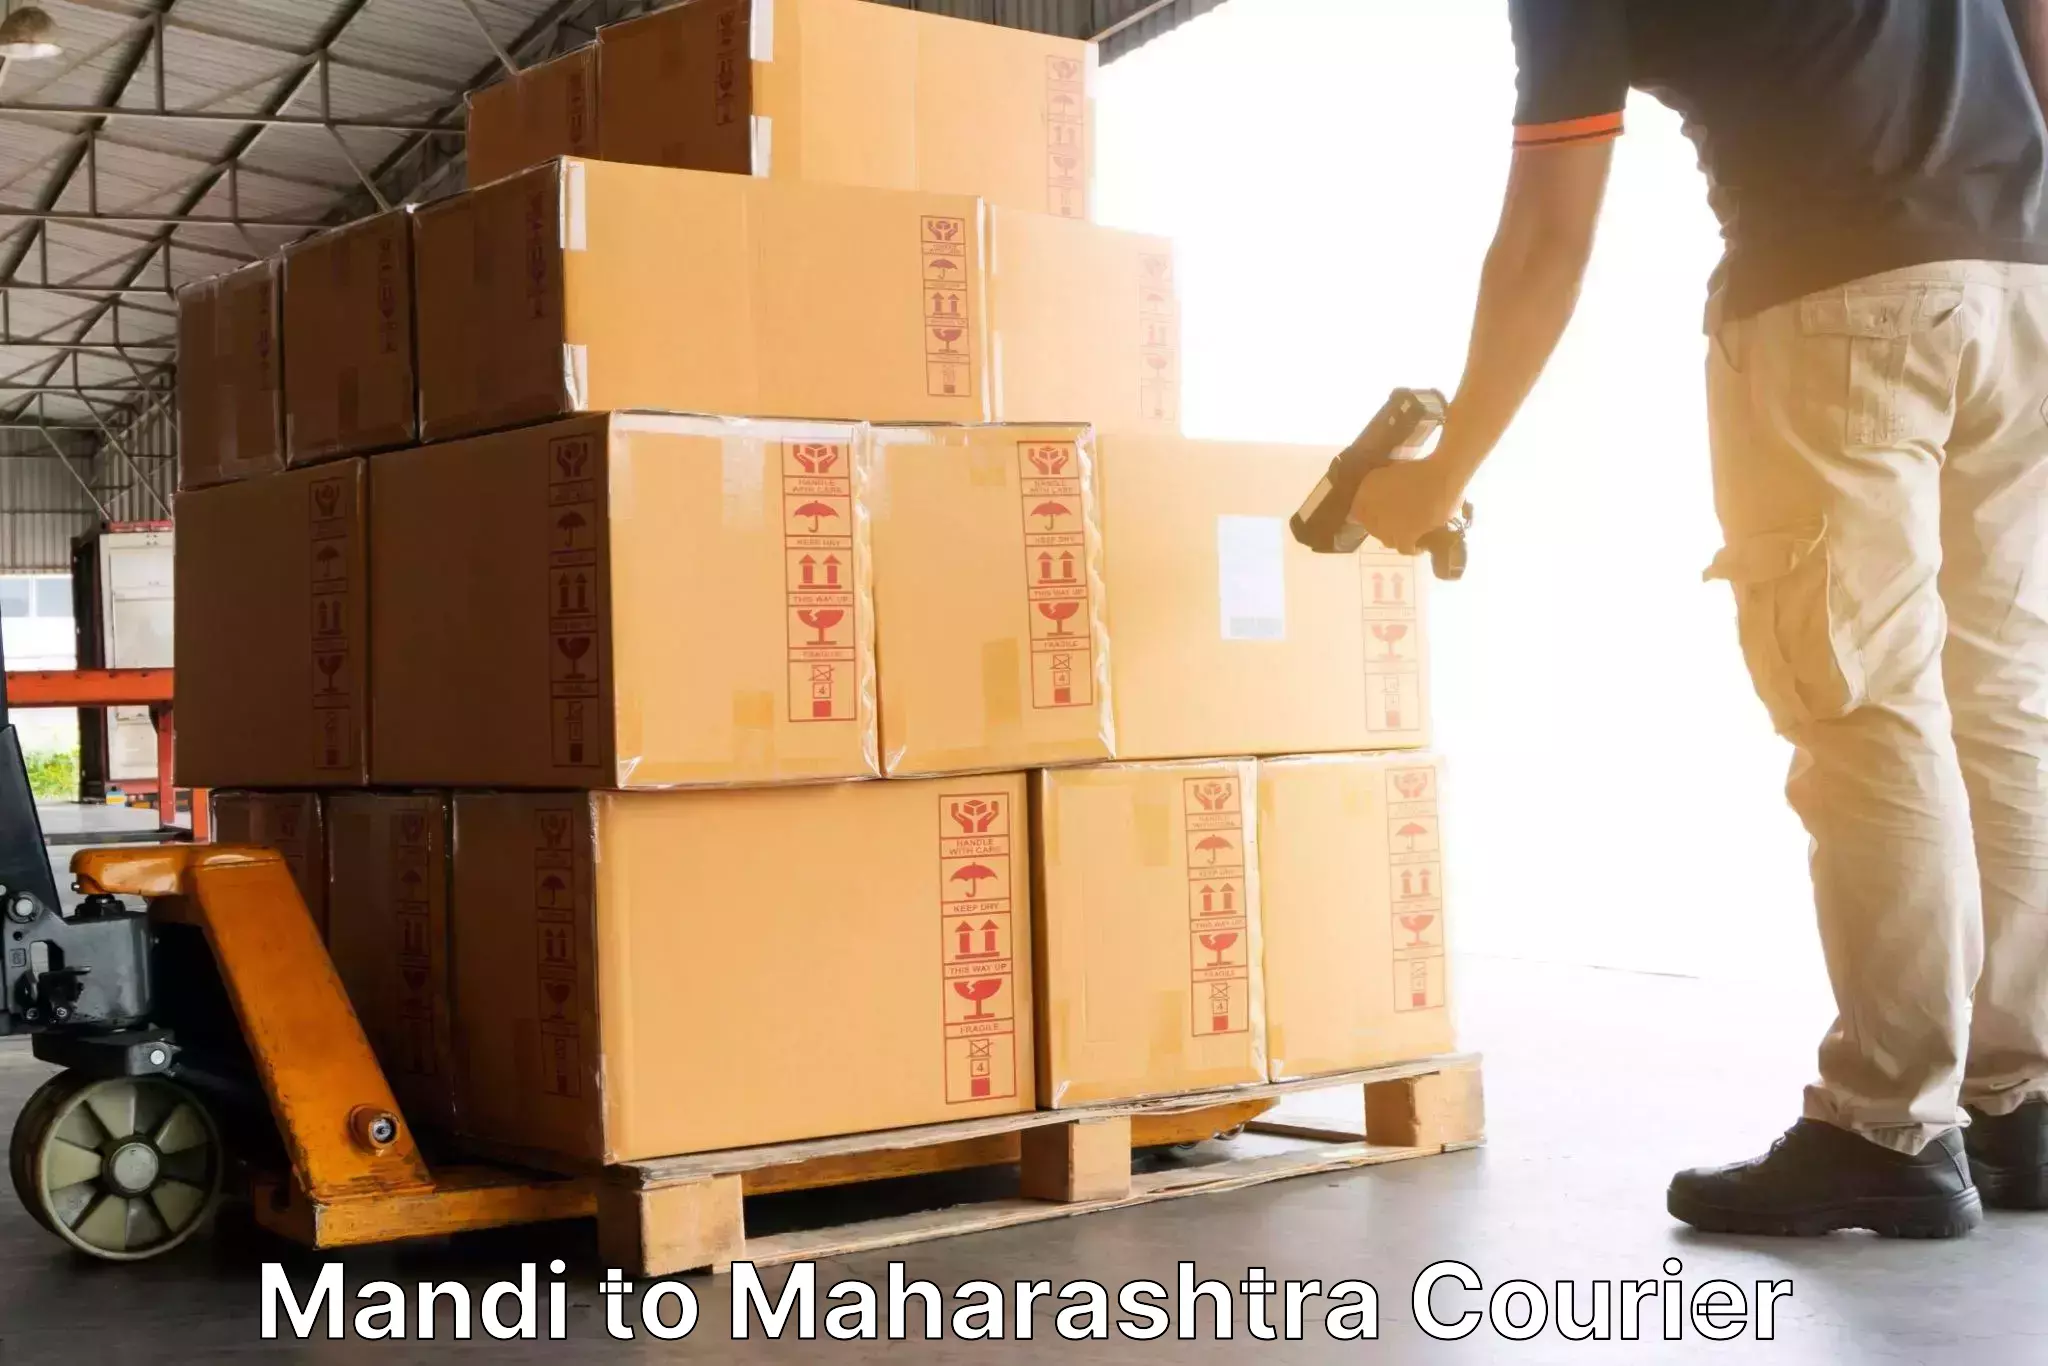 Secure package delivery Mandi to Pune